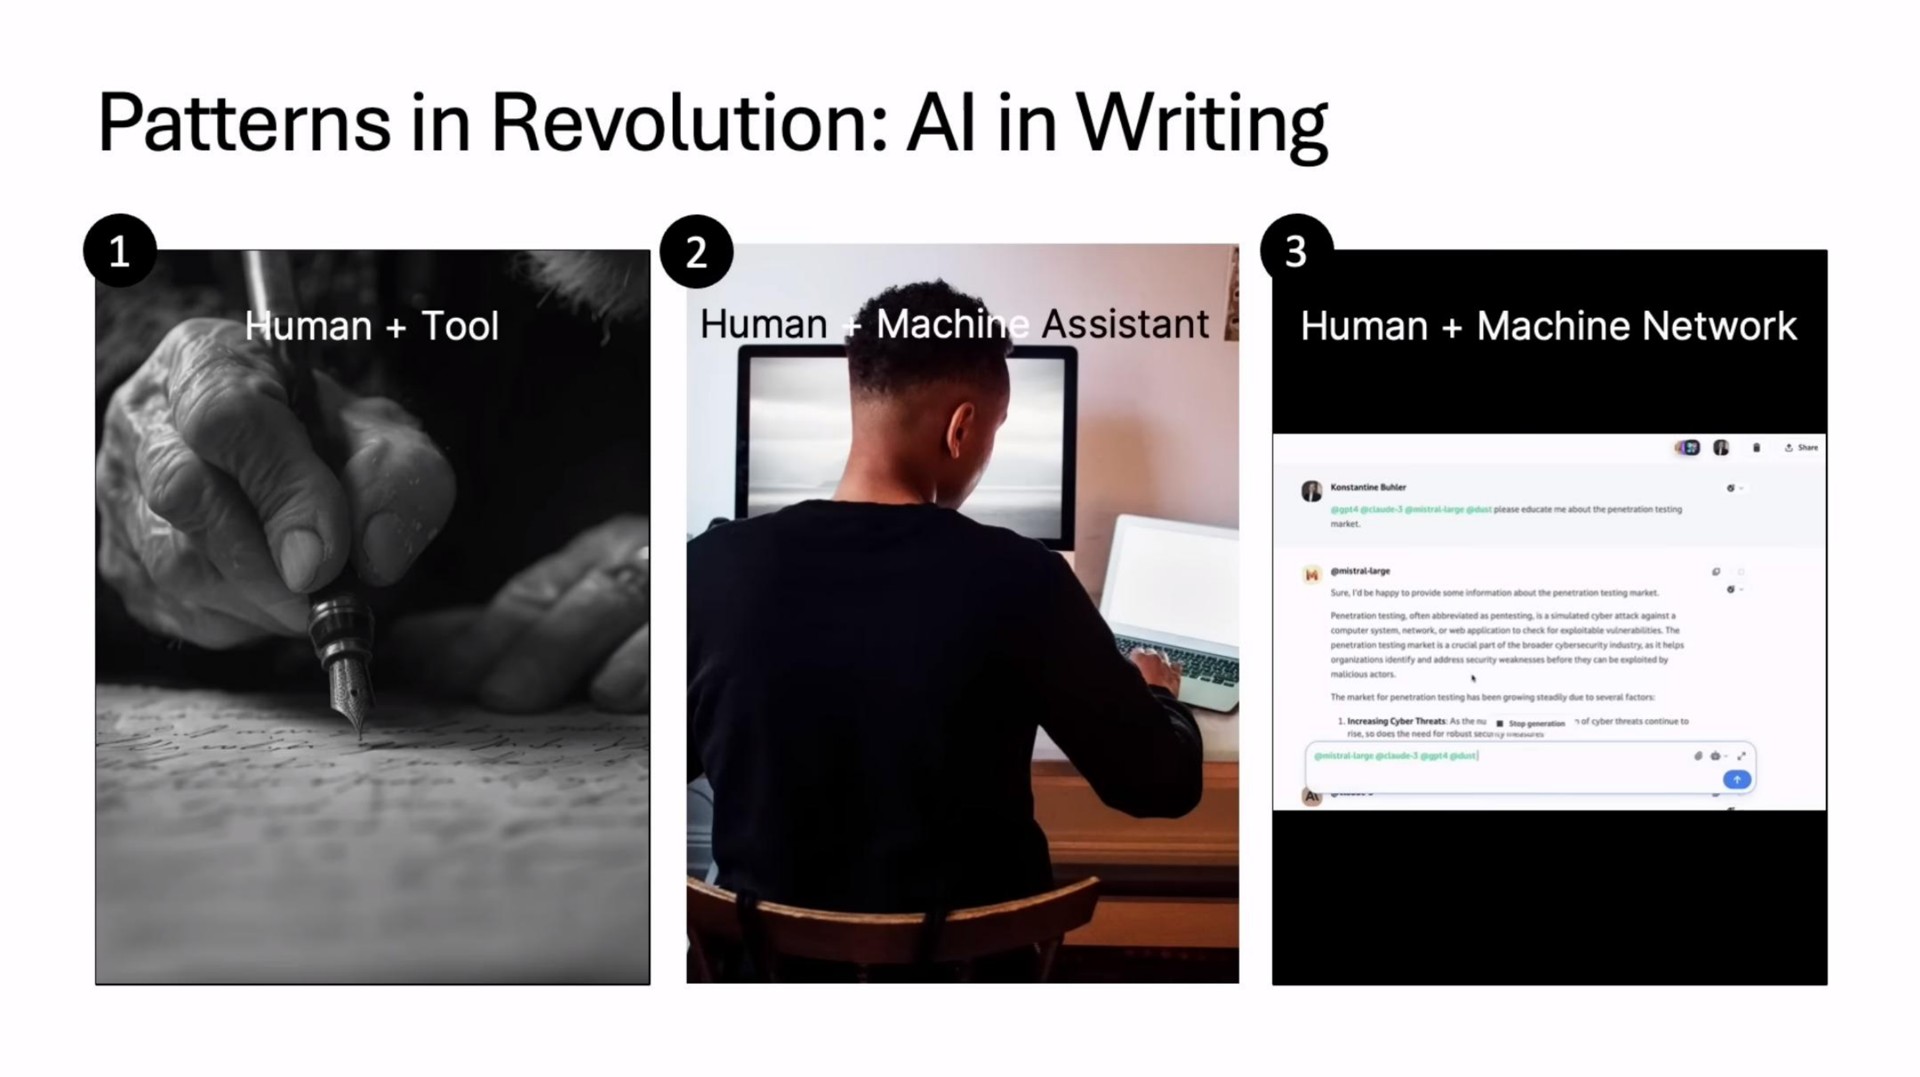 patterns in revolution in writing | Sequoia Capital